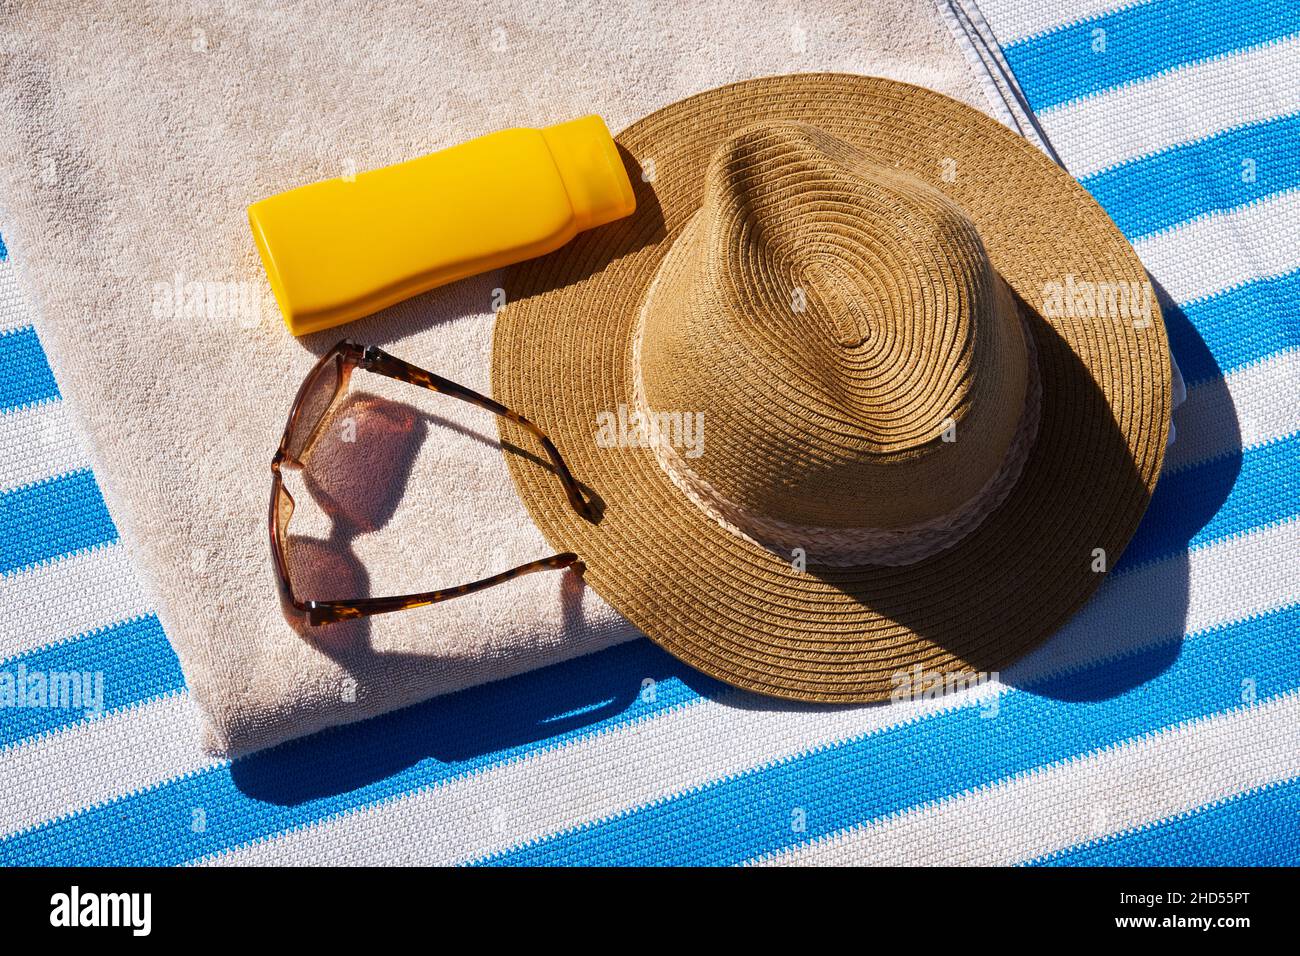 Yellow sunscreen cream bottles for skin protection, sun glasses, straw hat and beach towel on the blue striped mattress. Summer recreation concept. Fl Stock Photo